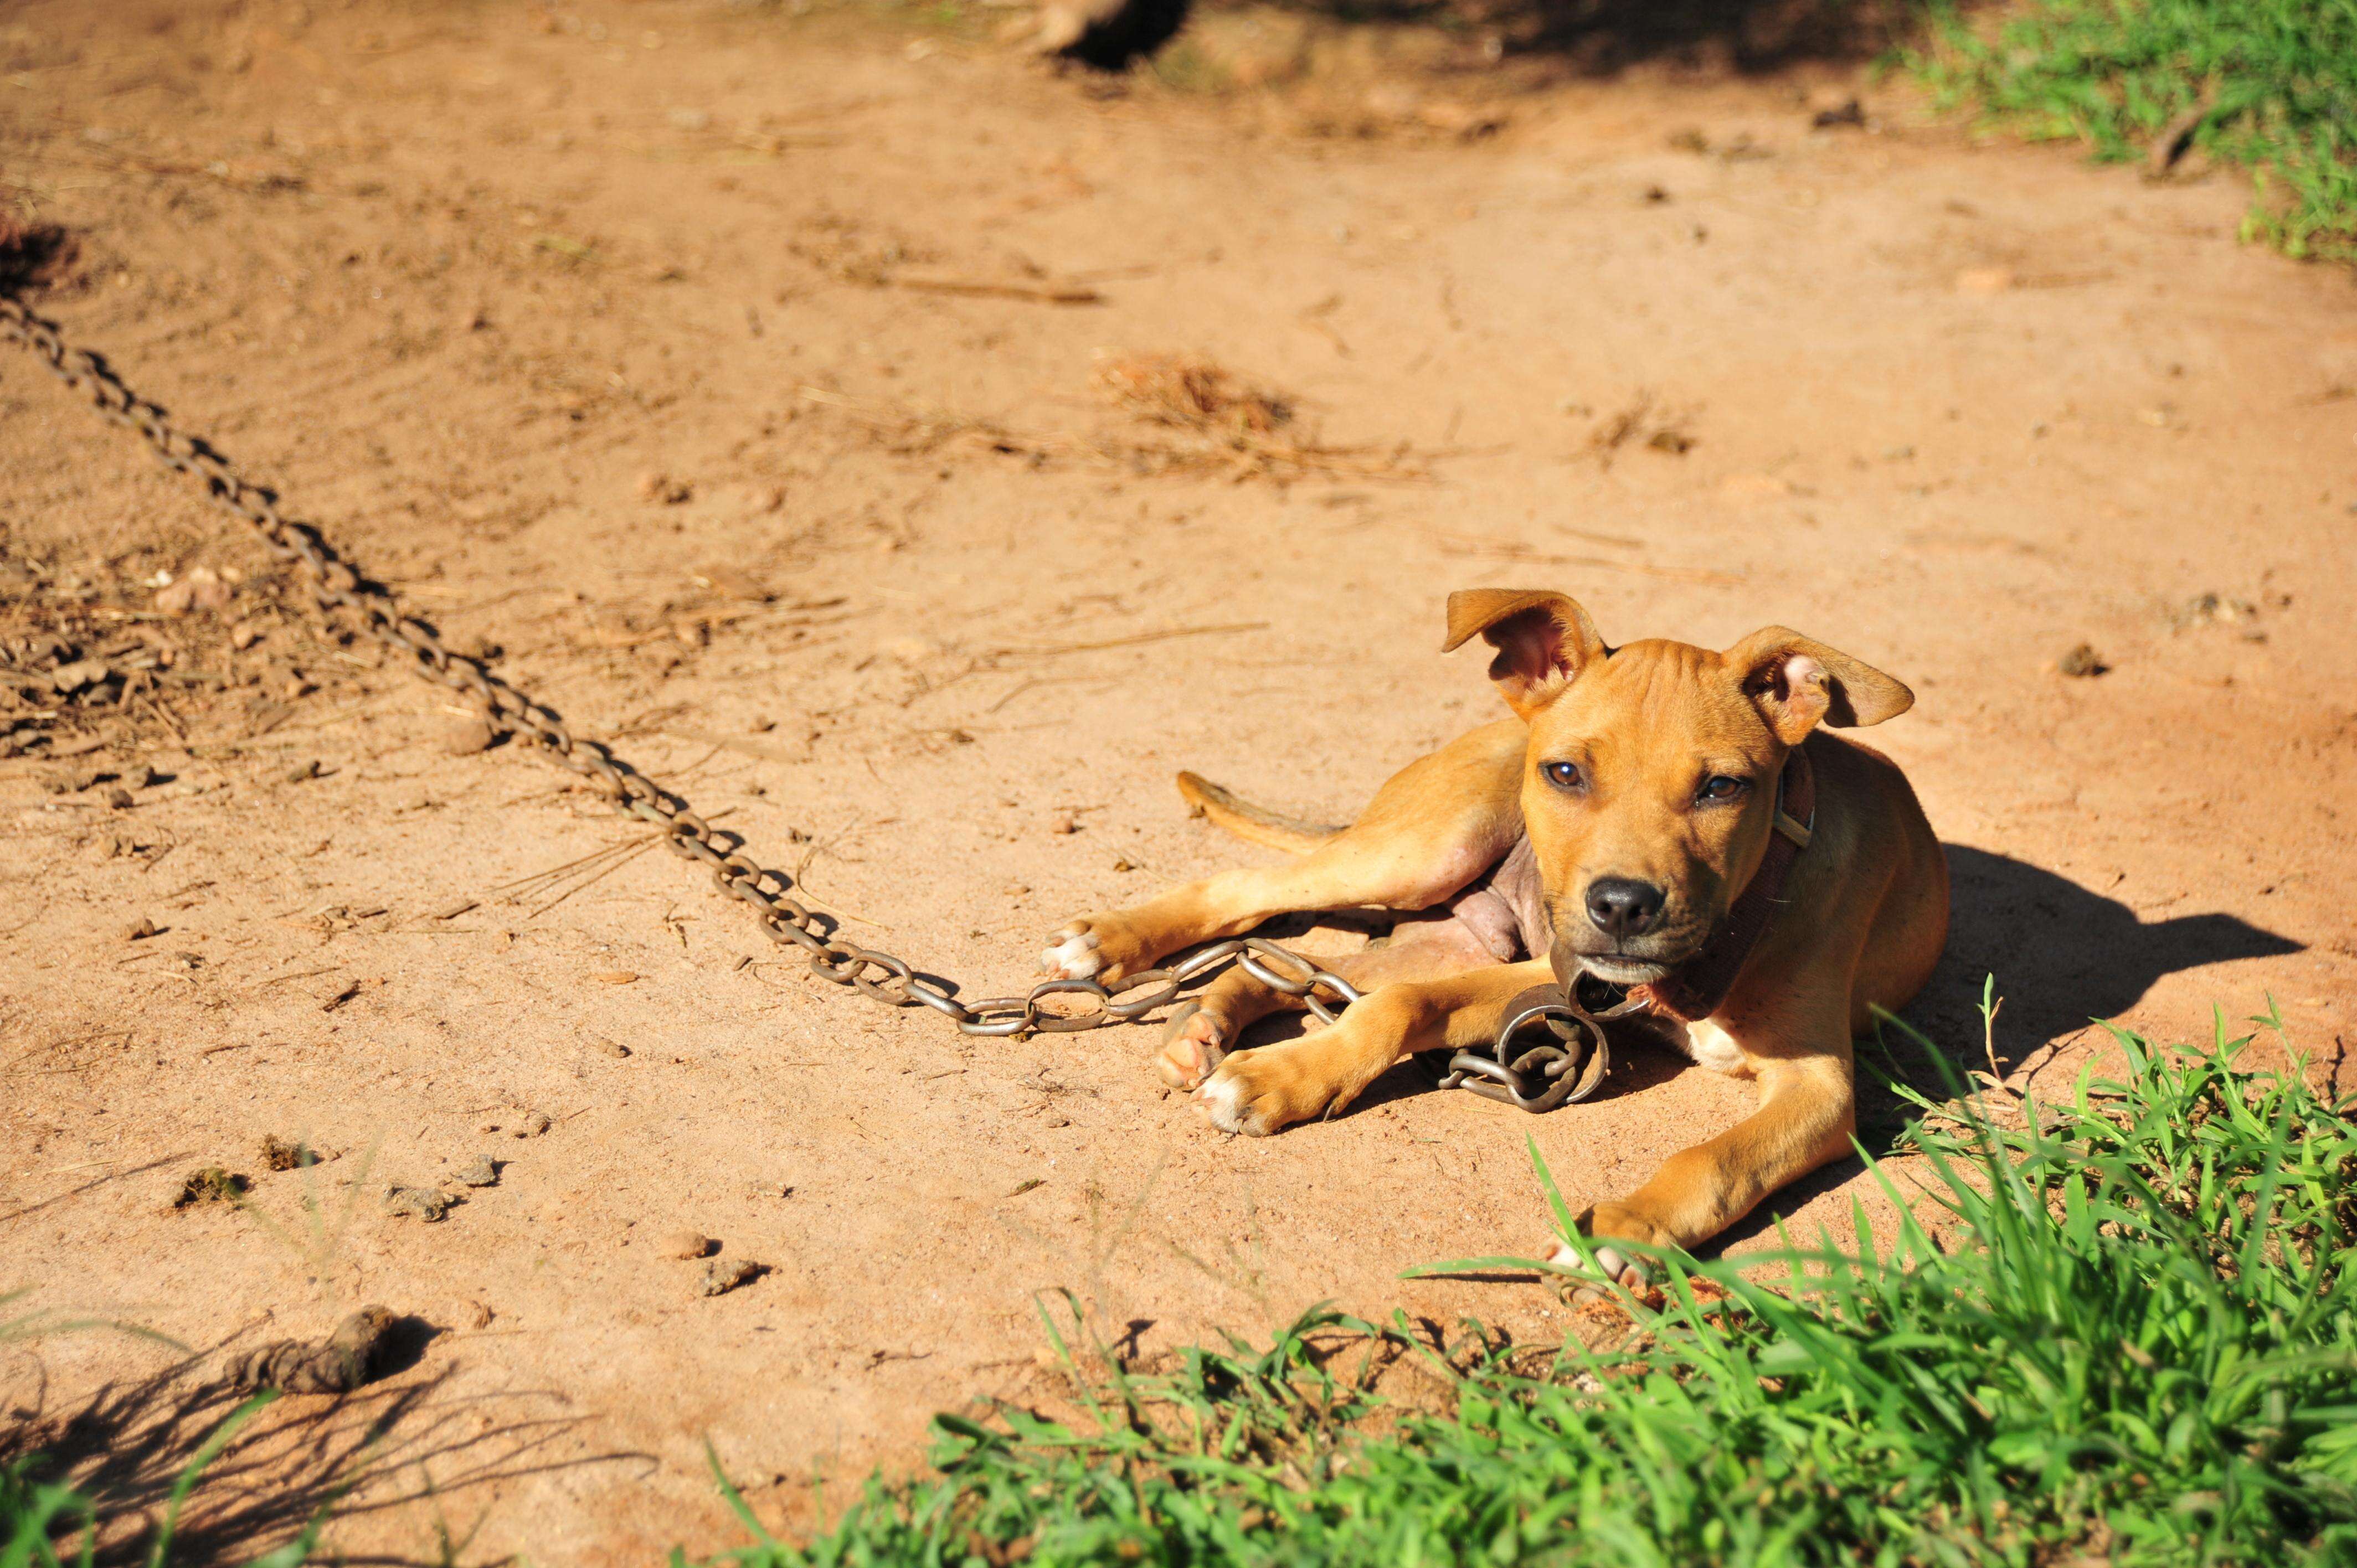 Dog on chain at dog fighting operation